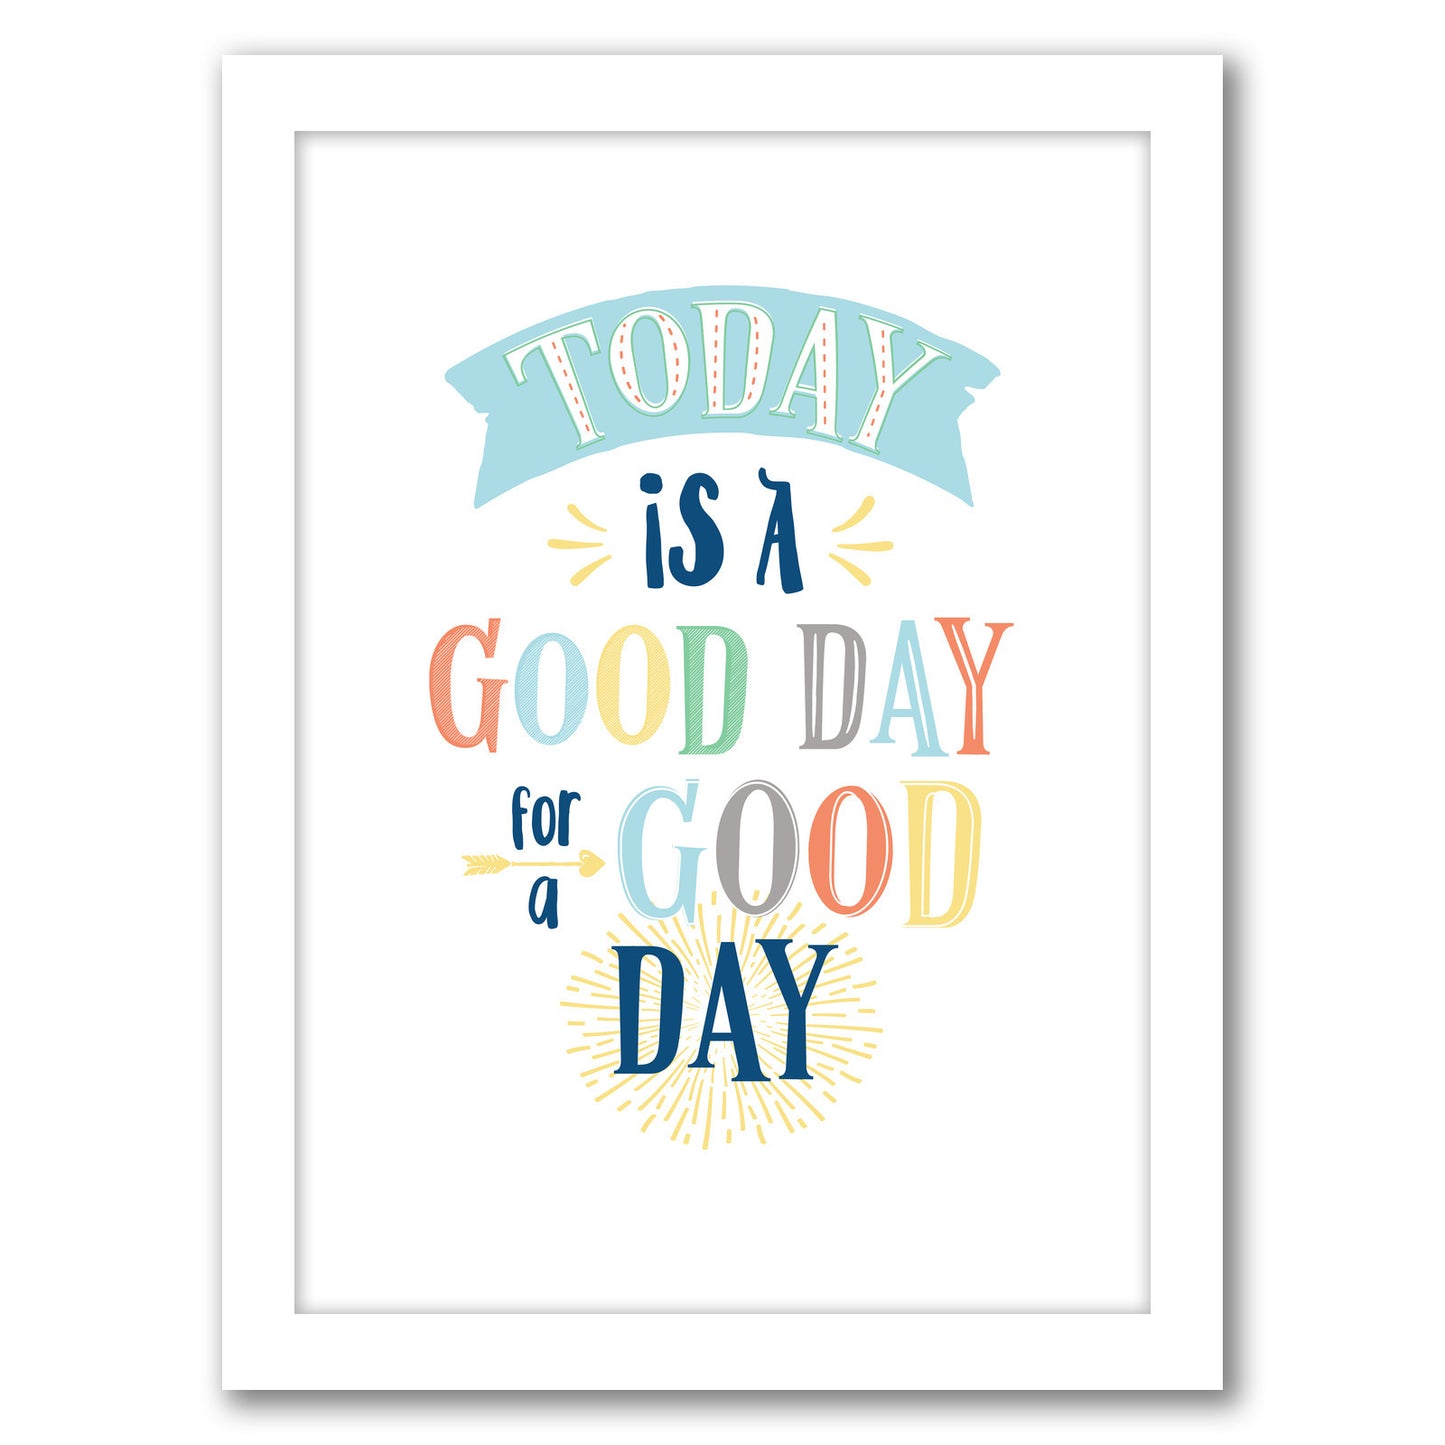 Today Is A Good Day By Elena David - White Framed Print